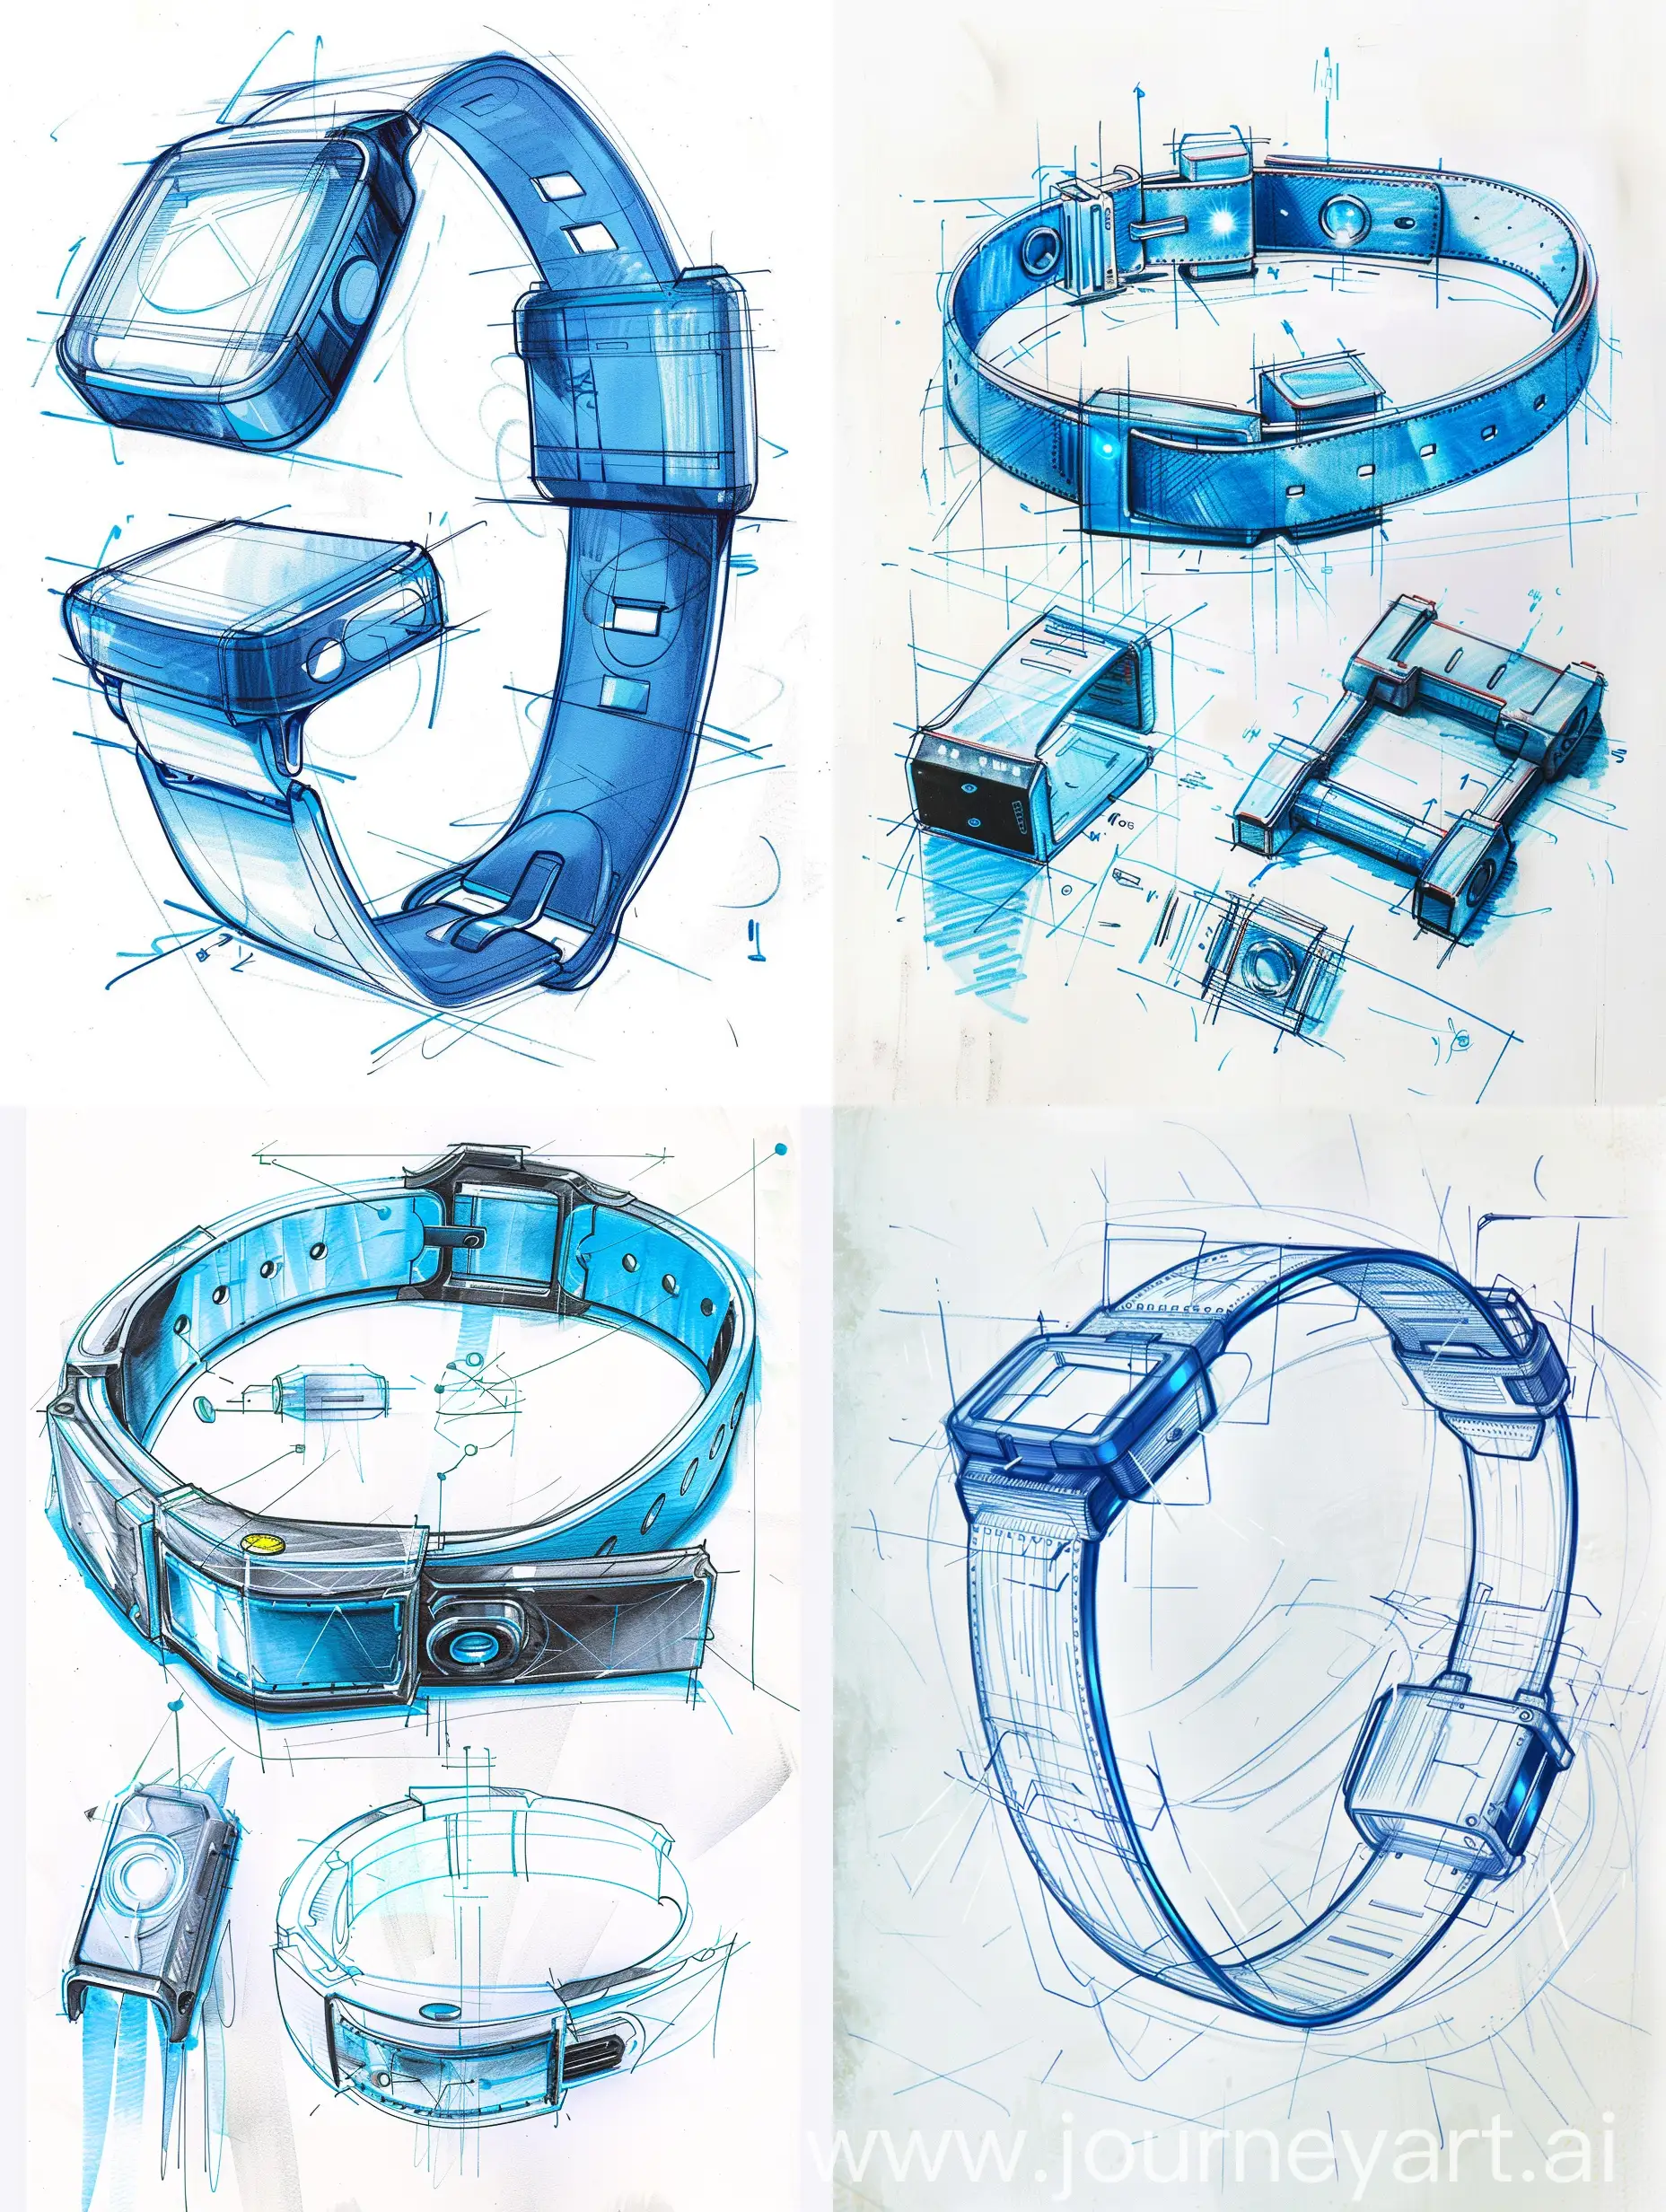 Futuristic-Smart-Belt-Industrial-Design-Sketch-in-Blue-with-MultiAngle-Display